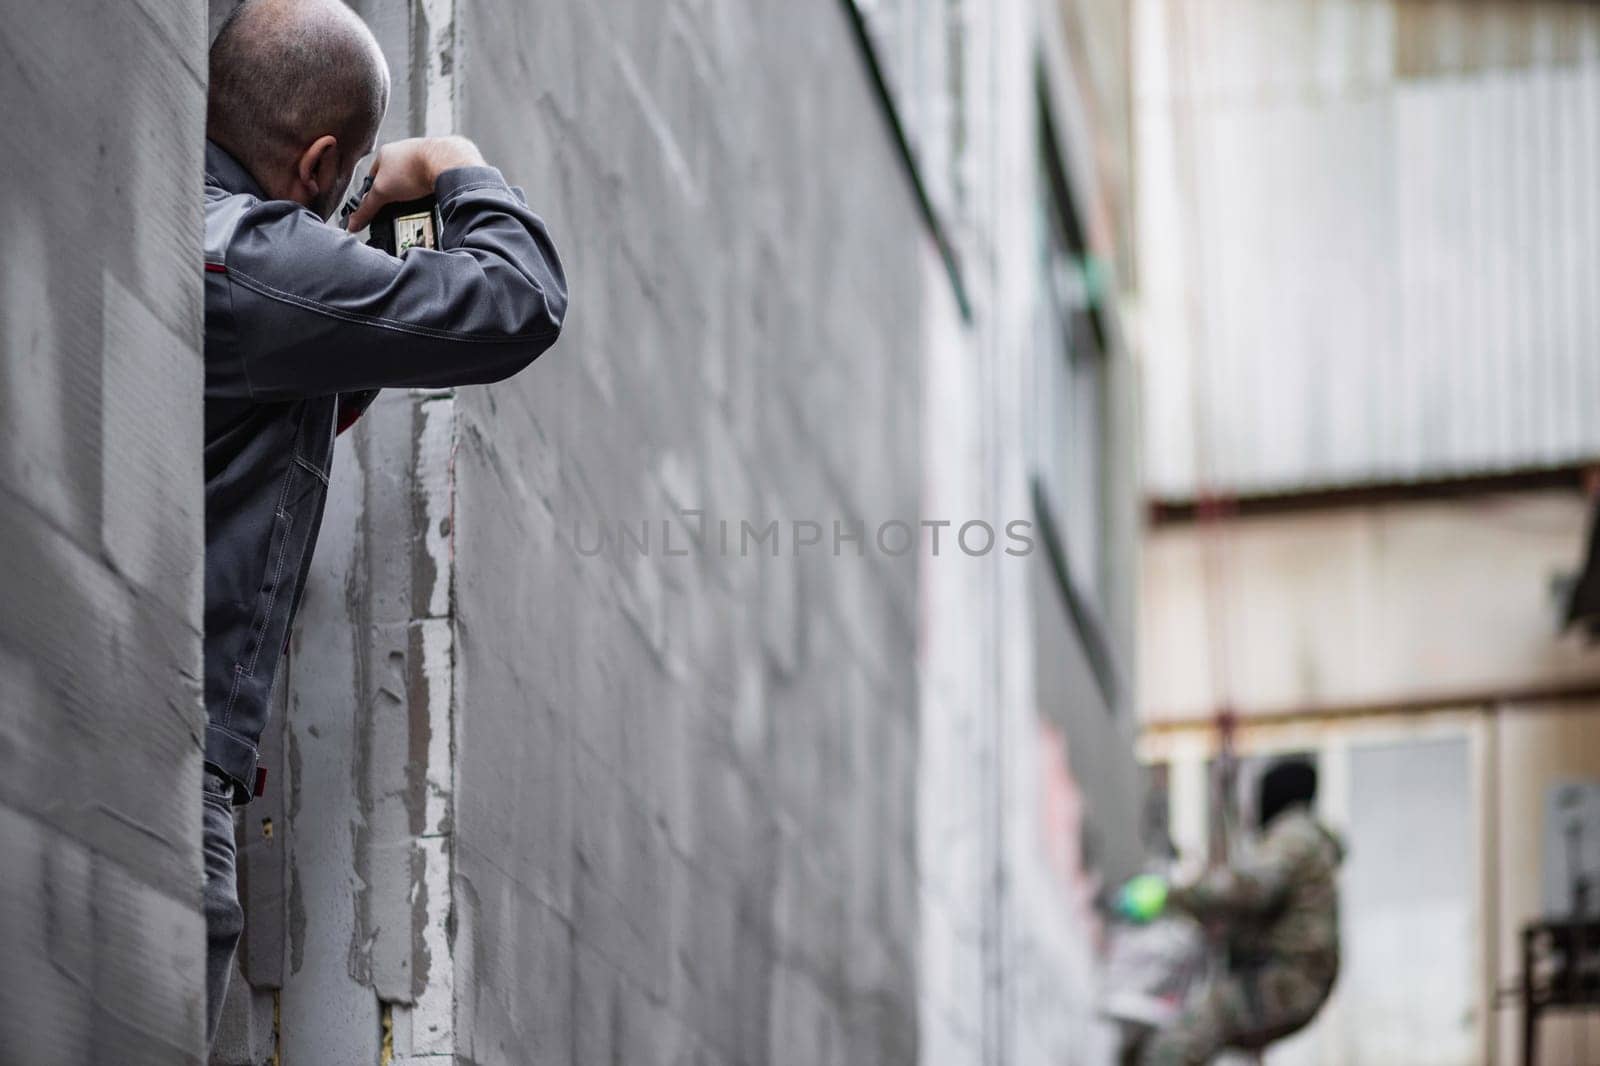 A professional industrial photographer supervises and records construction stages at a construction site.